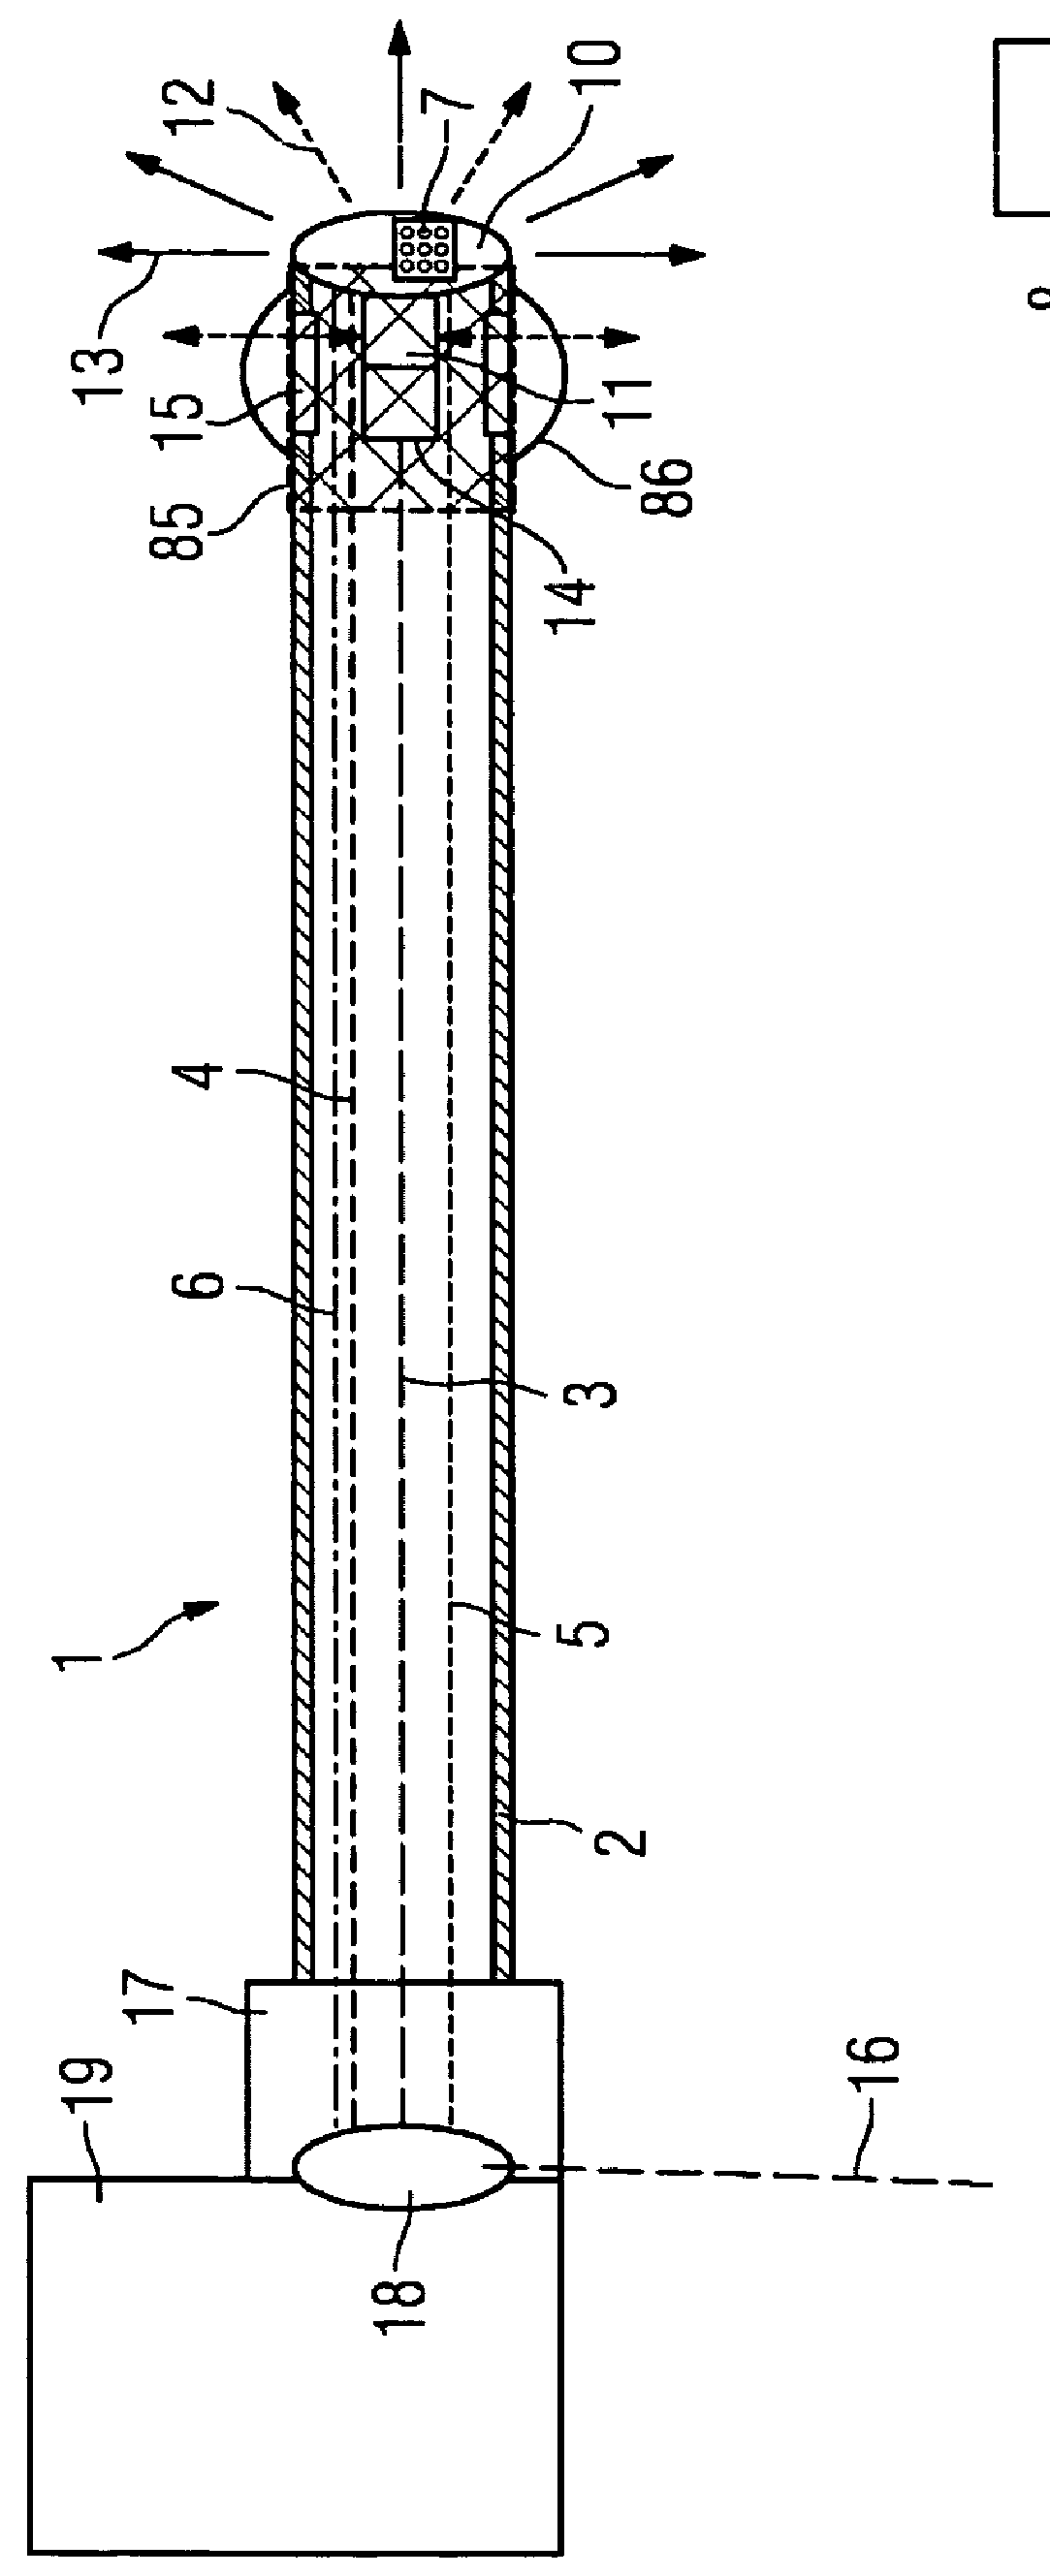 Catheter device for treating a blockage of a vessel